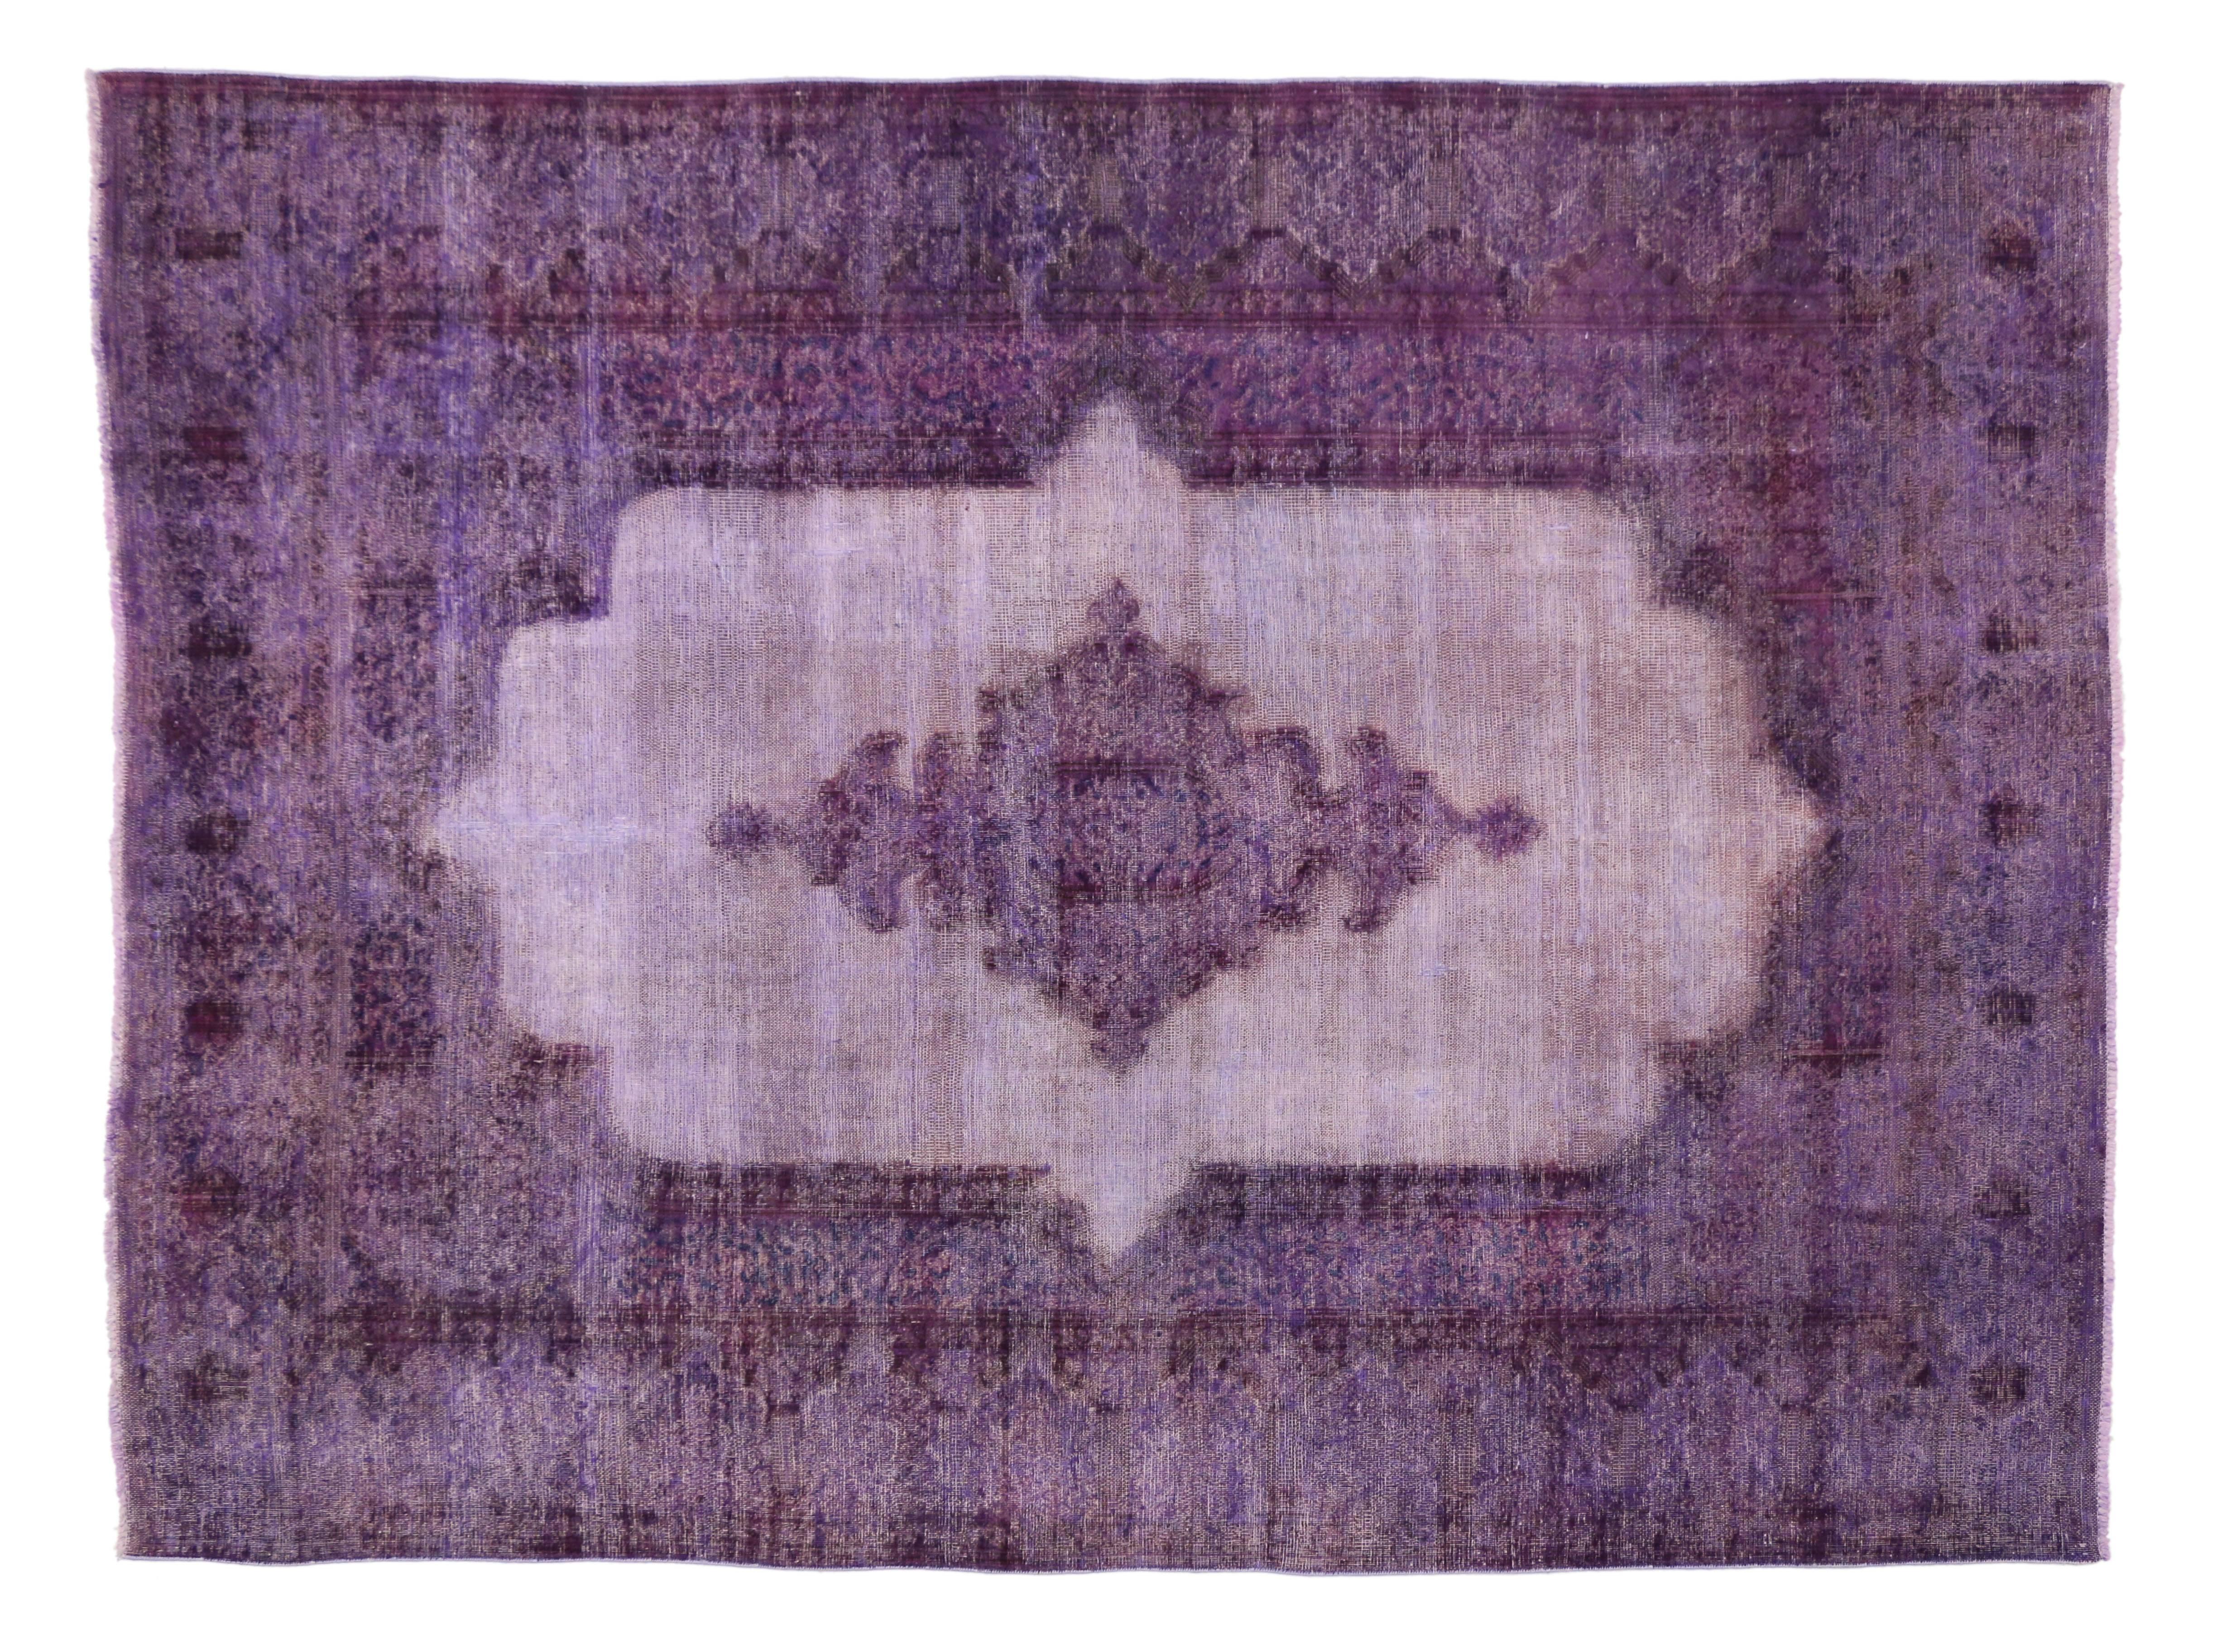 Hand-Knotted Distressed Overdyed Purple Persian Rug with Post-Modern Memphis Style